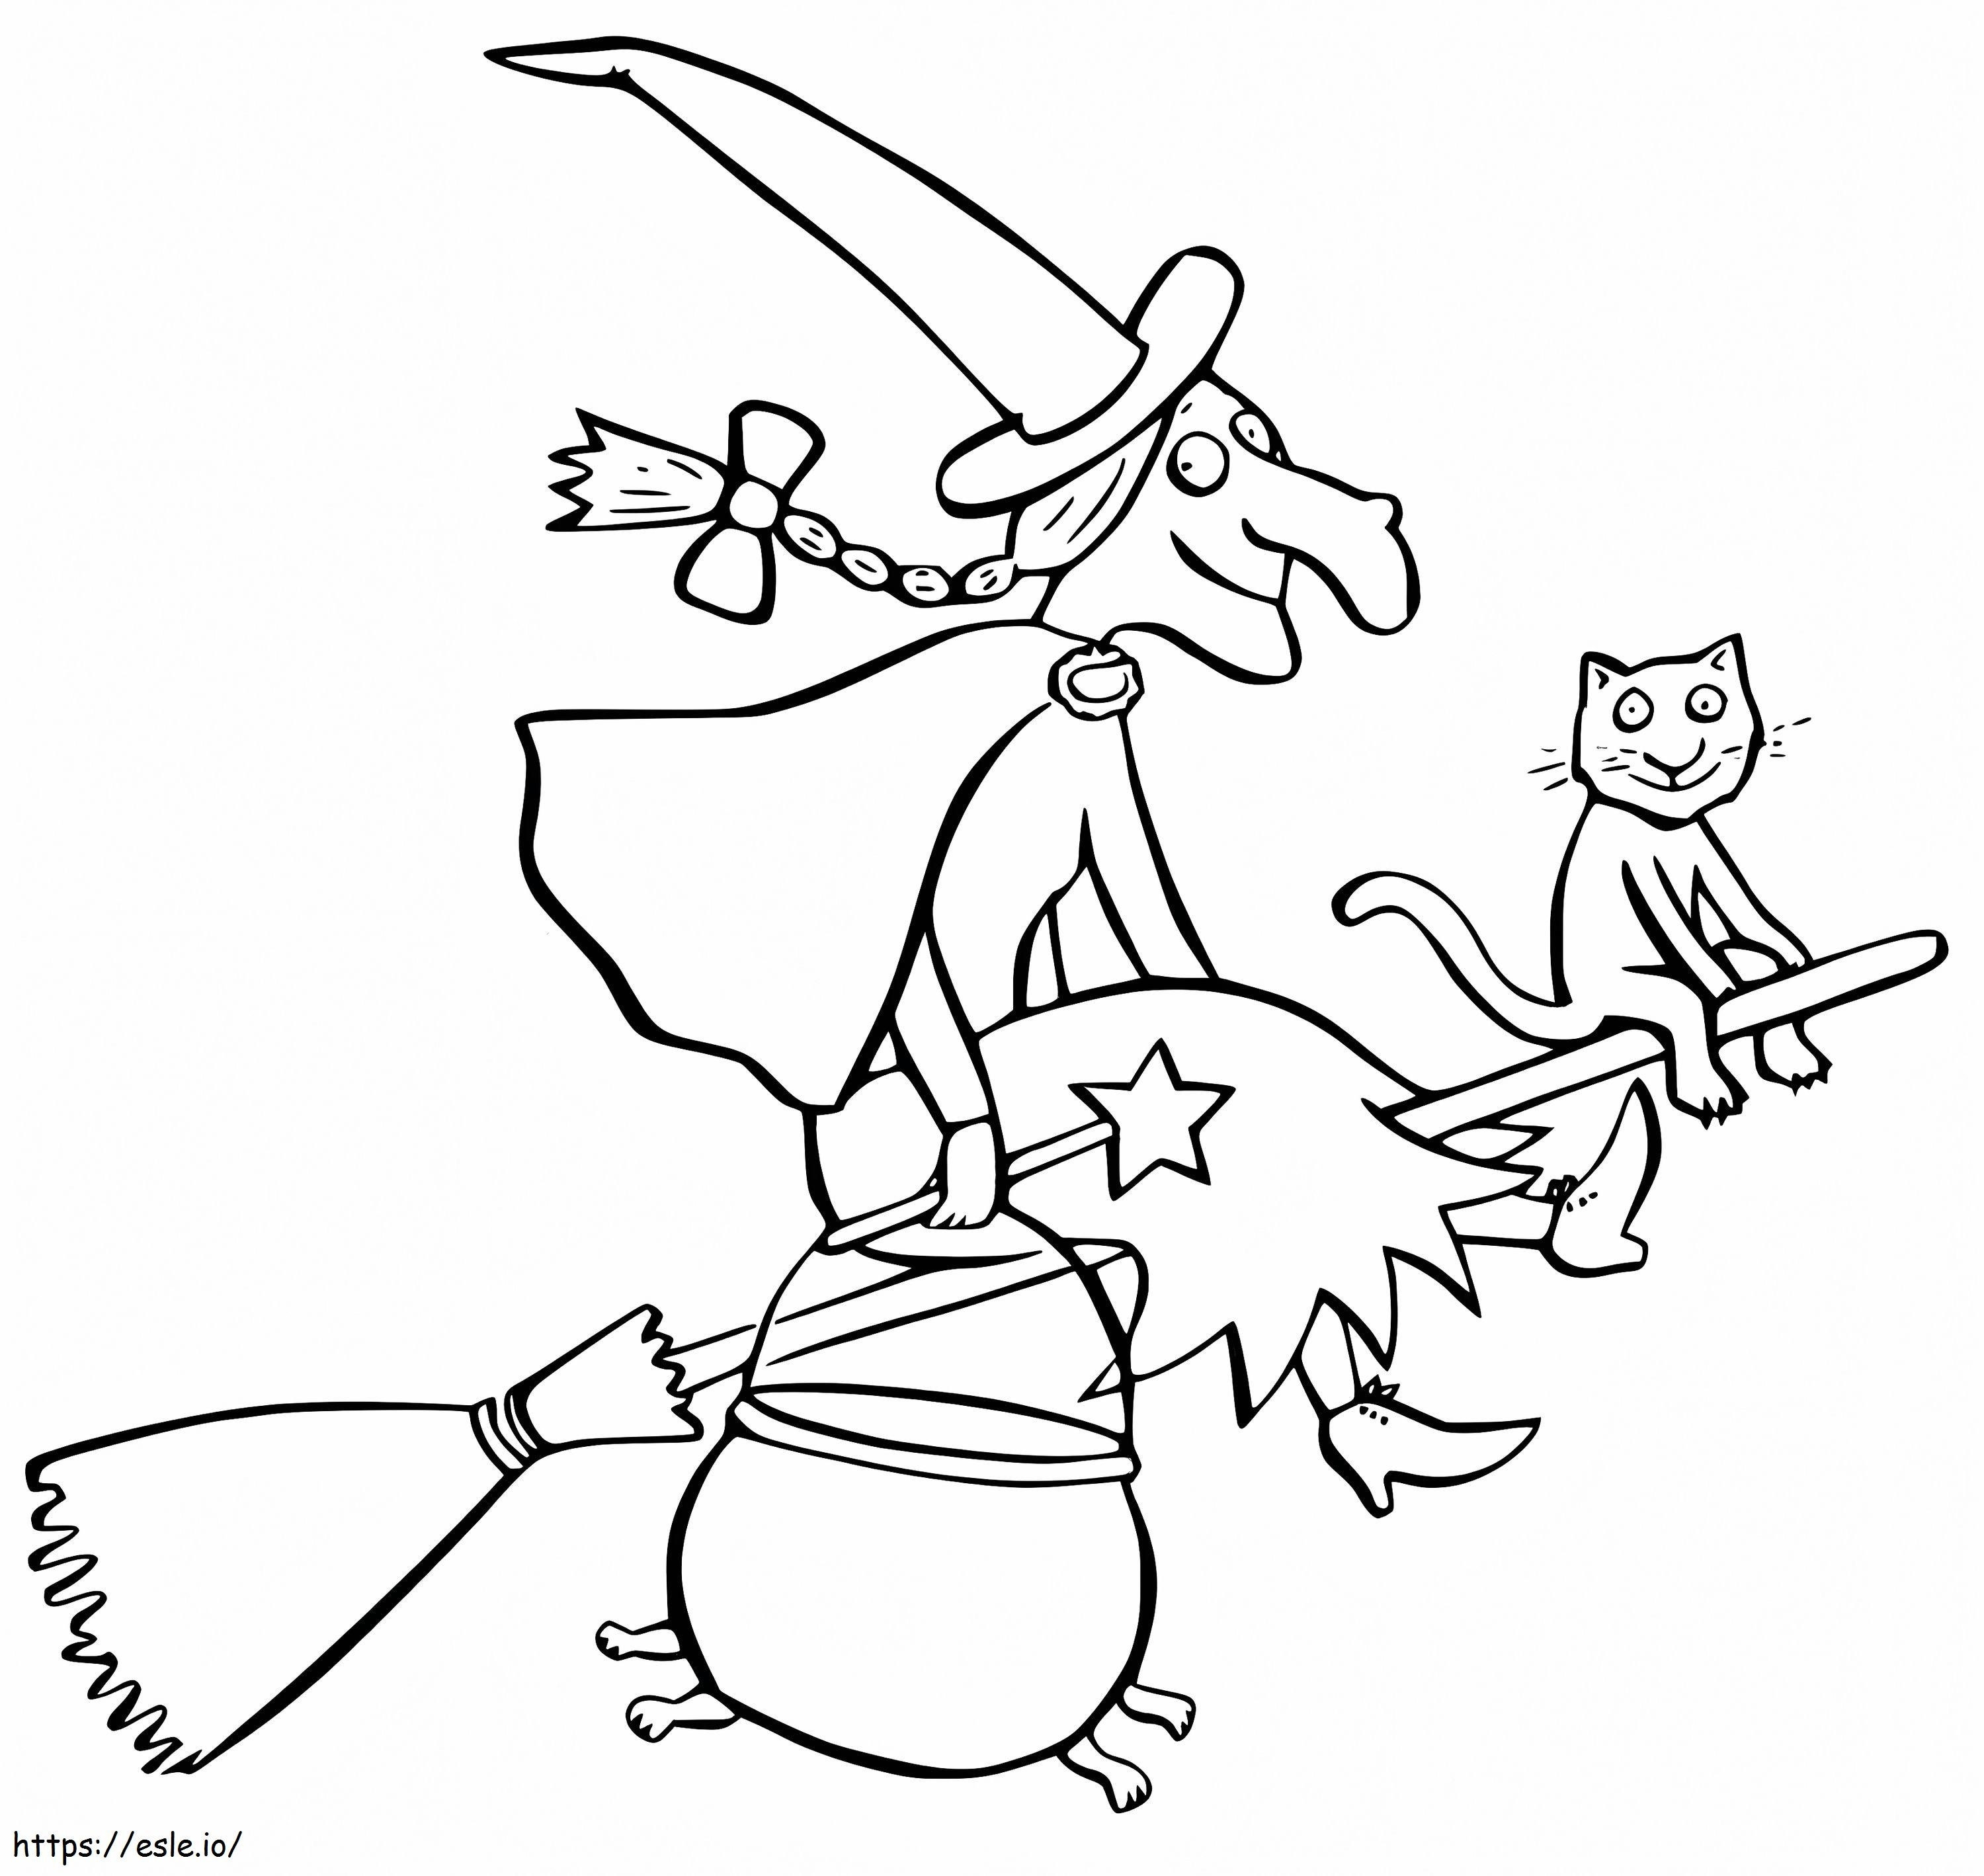 Room On The Broom 4 coloring page